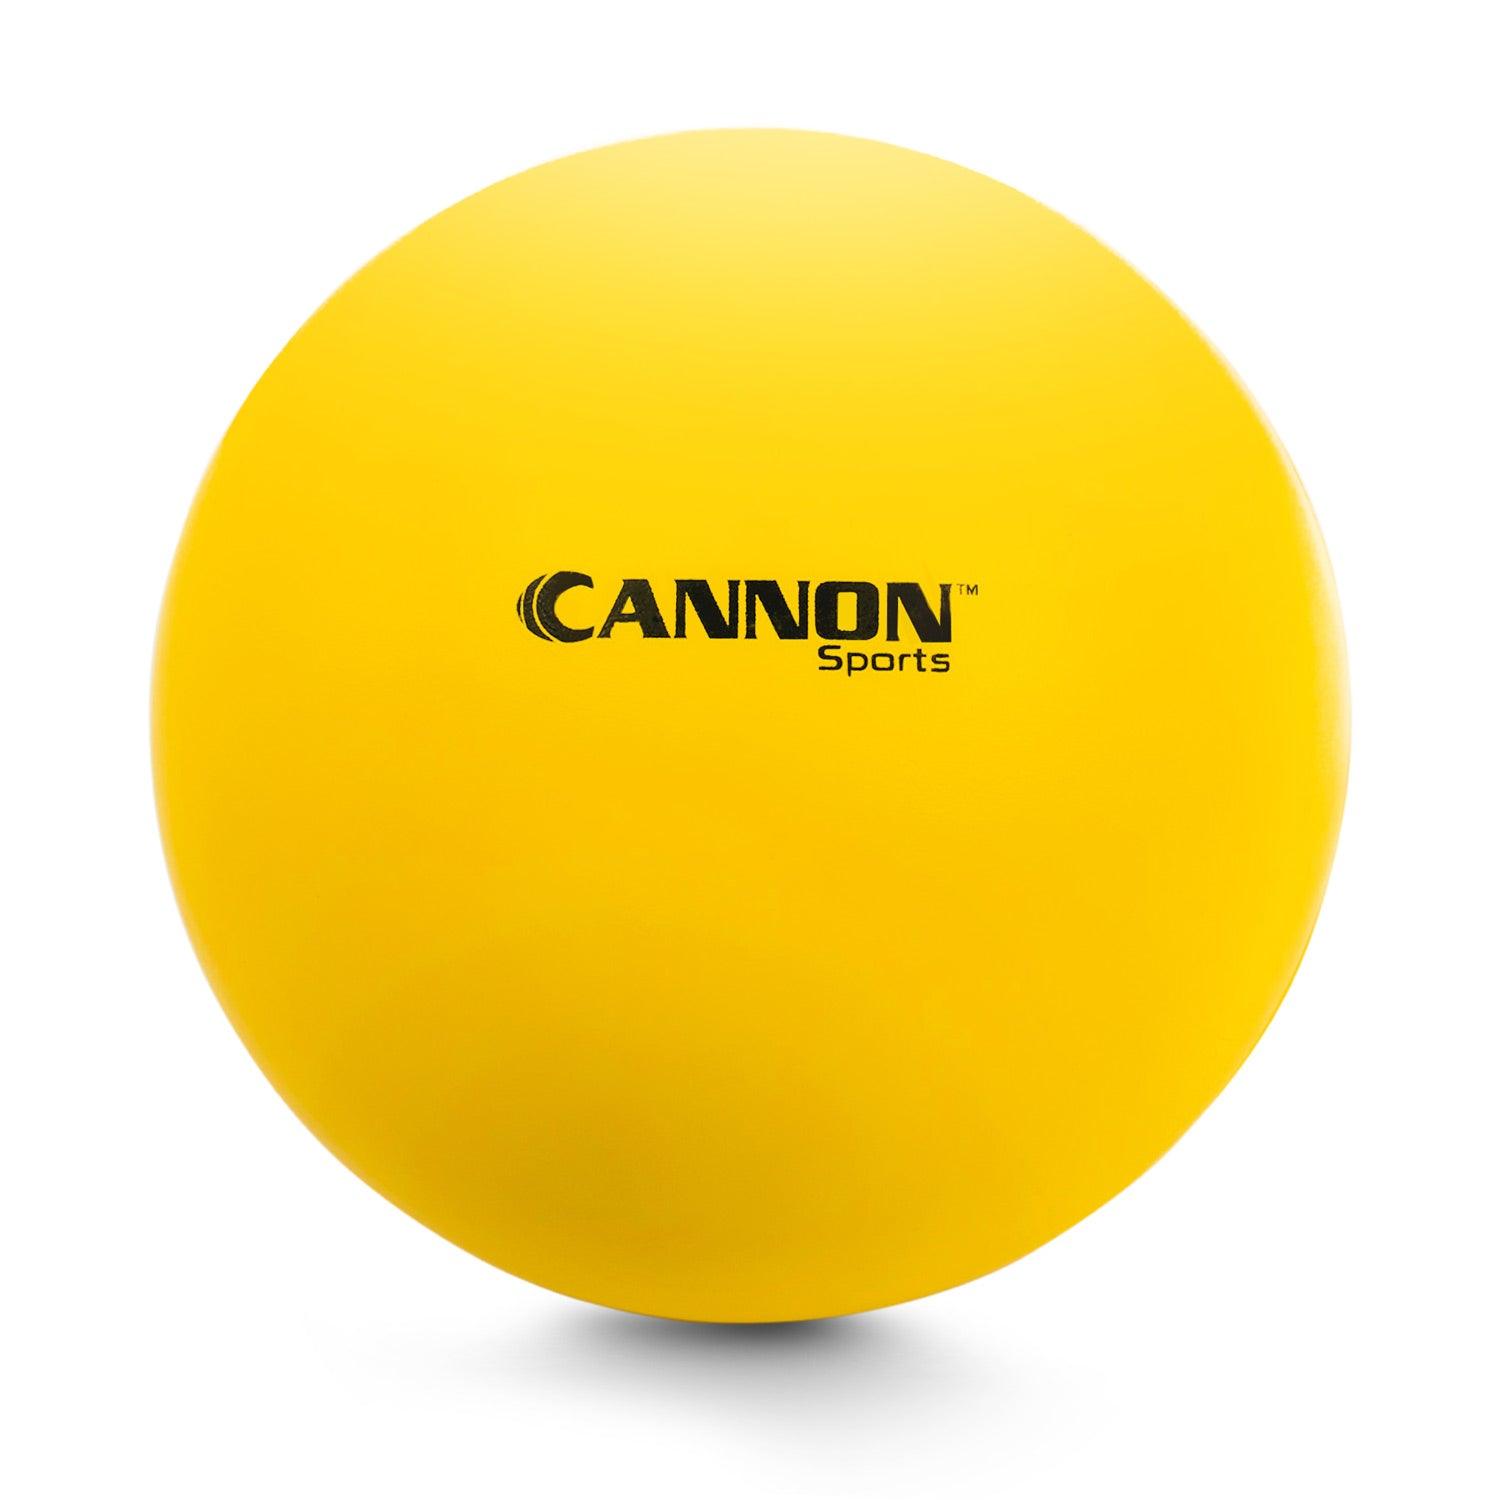 Cannon Sports 21041 Yellow Coated & Bouncy Foam Ball for Playground, Handball, and Kids Dodgeball (8.5 Inch) - Cannon Sports